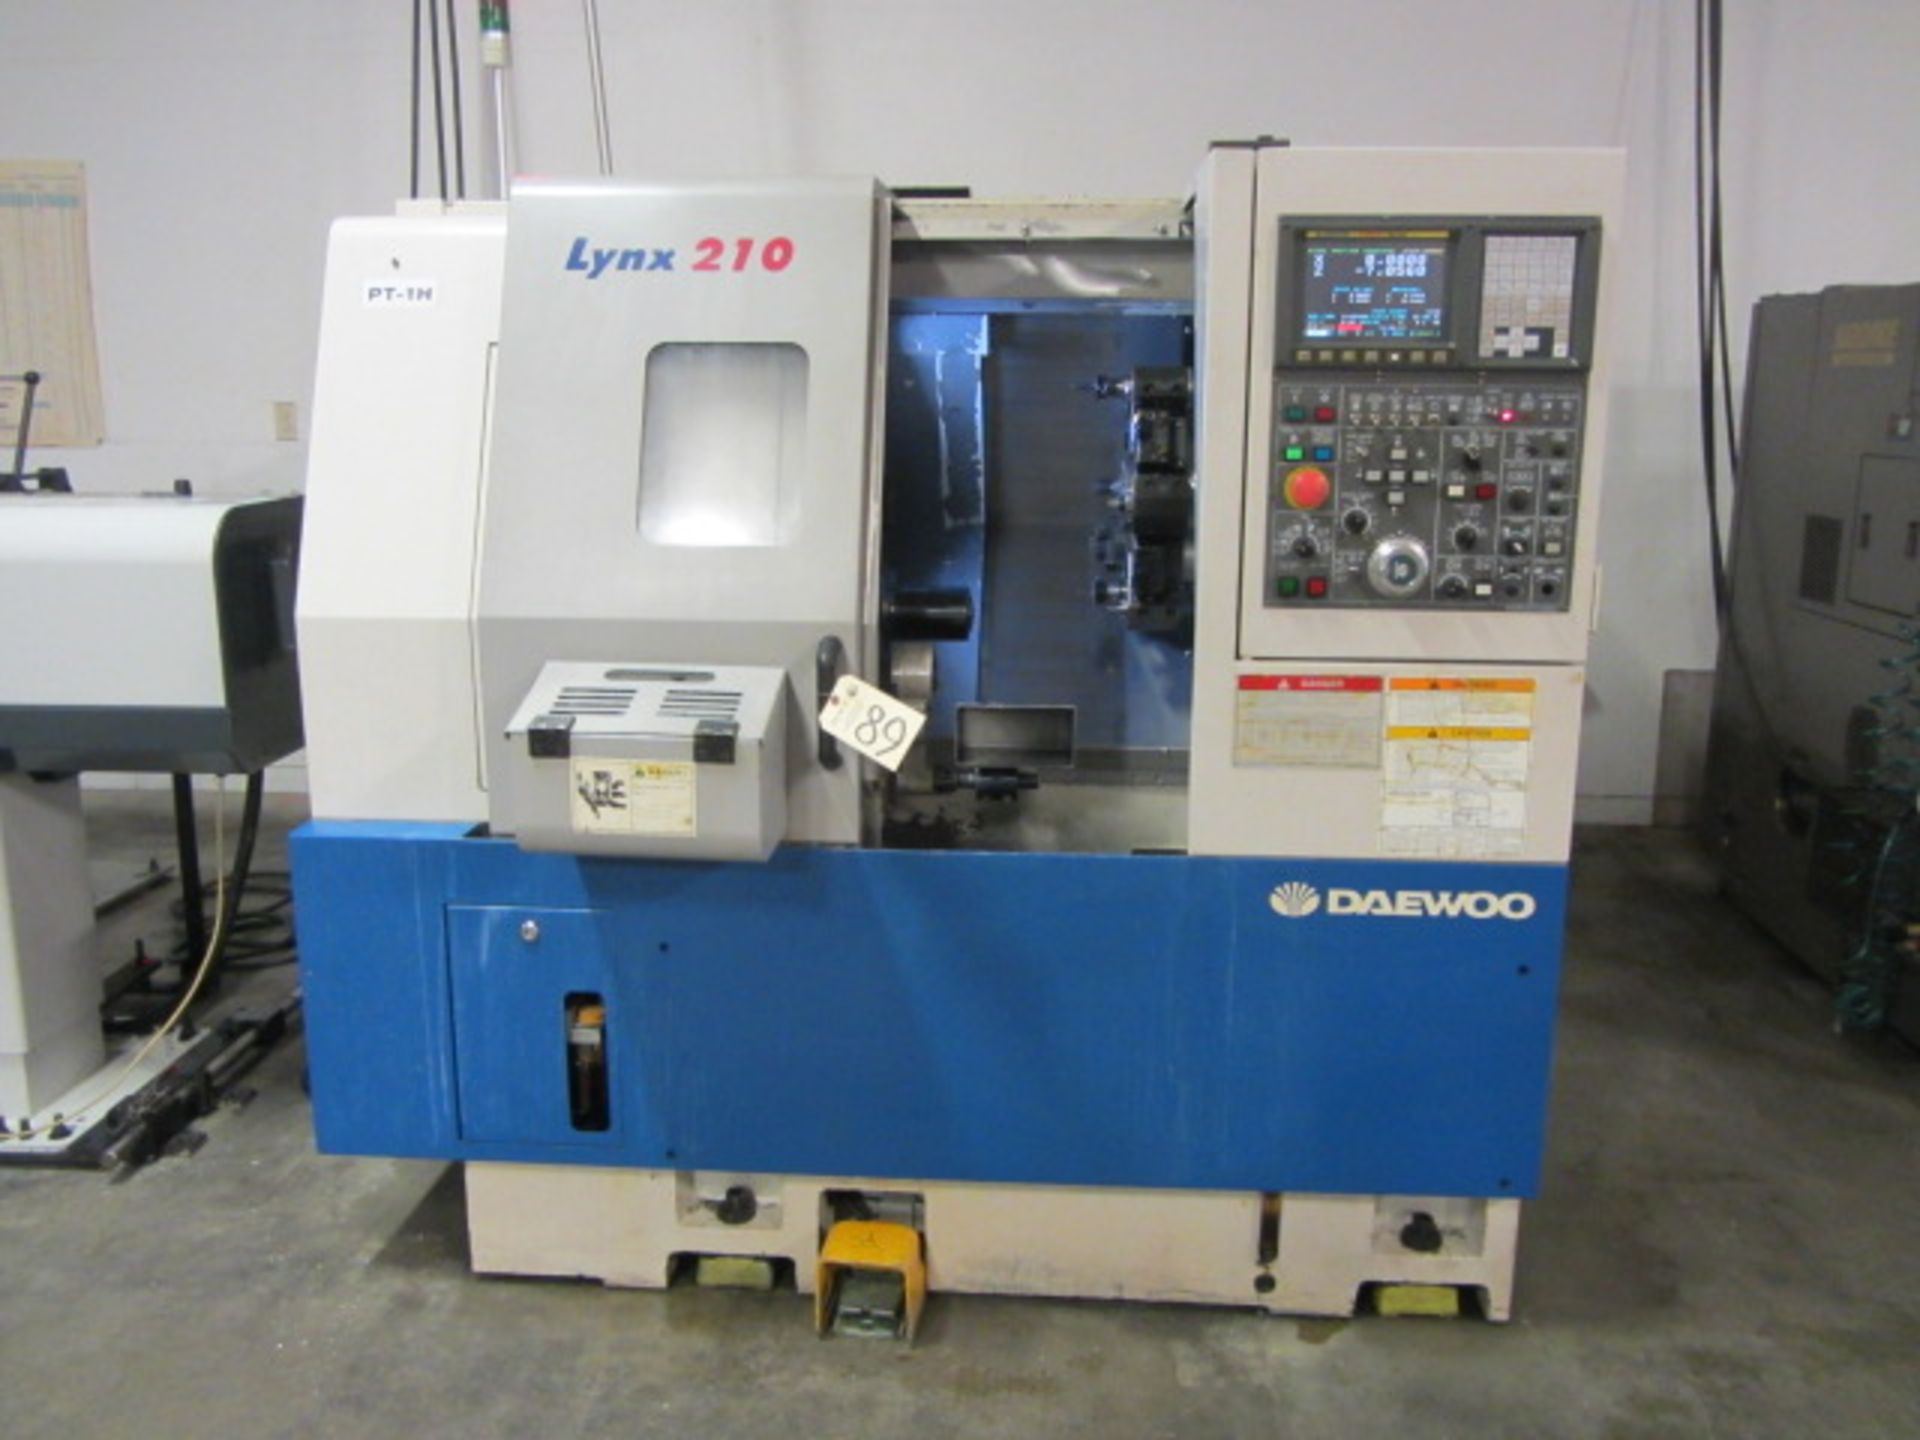 Daewoo Lynx 210A CNC Turning Center with 16C Collet Chuck, Parts Catcher, Fanuc i CNC Control, sn: